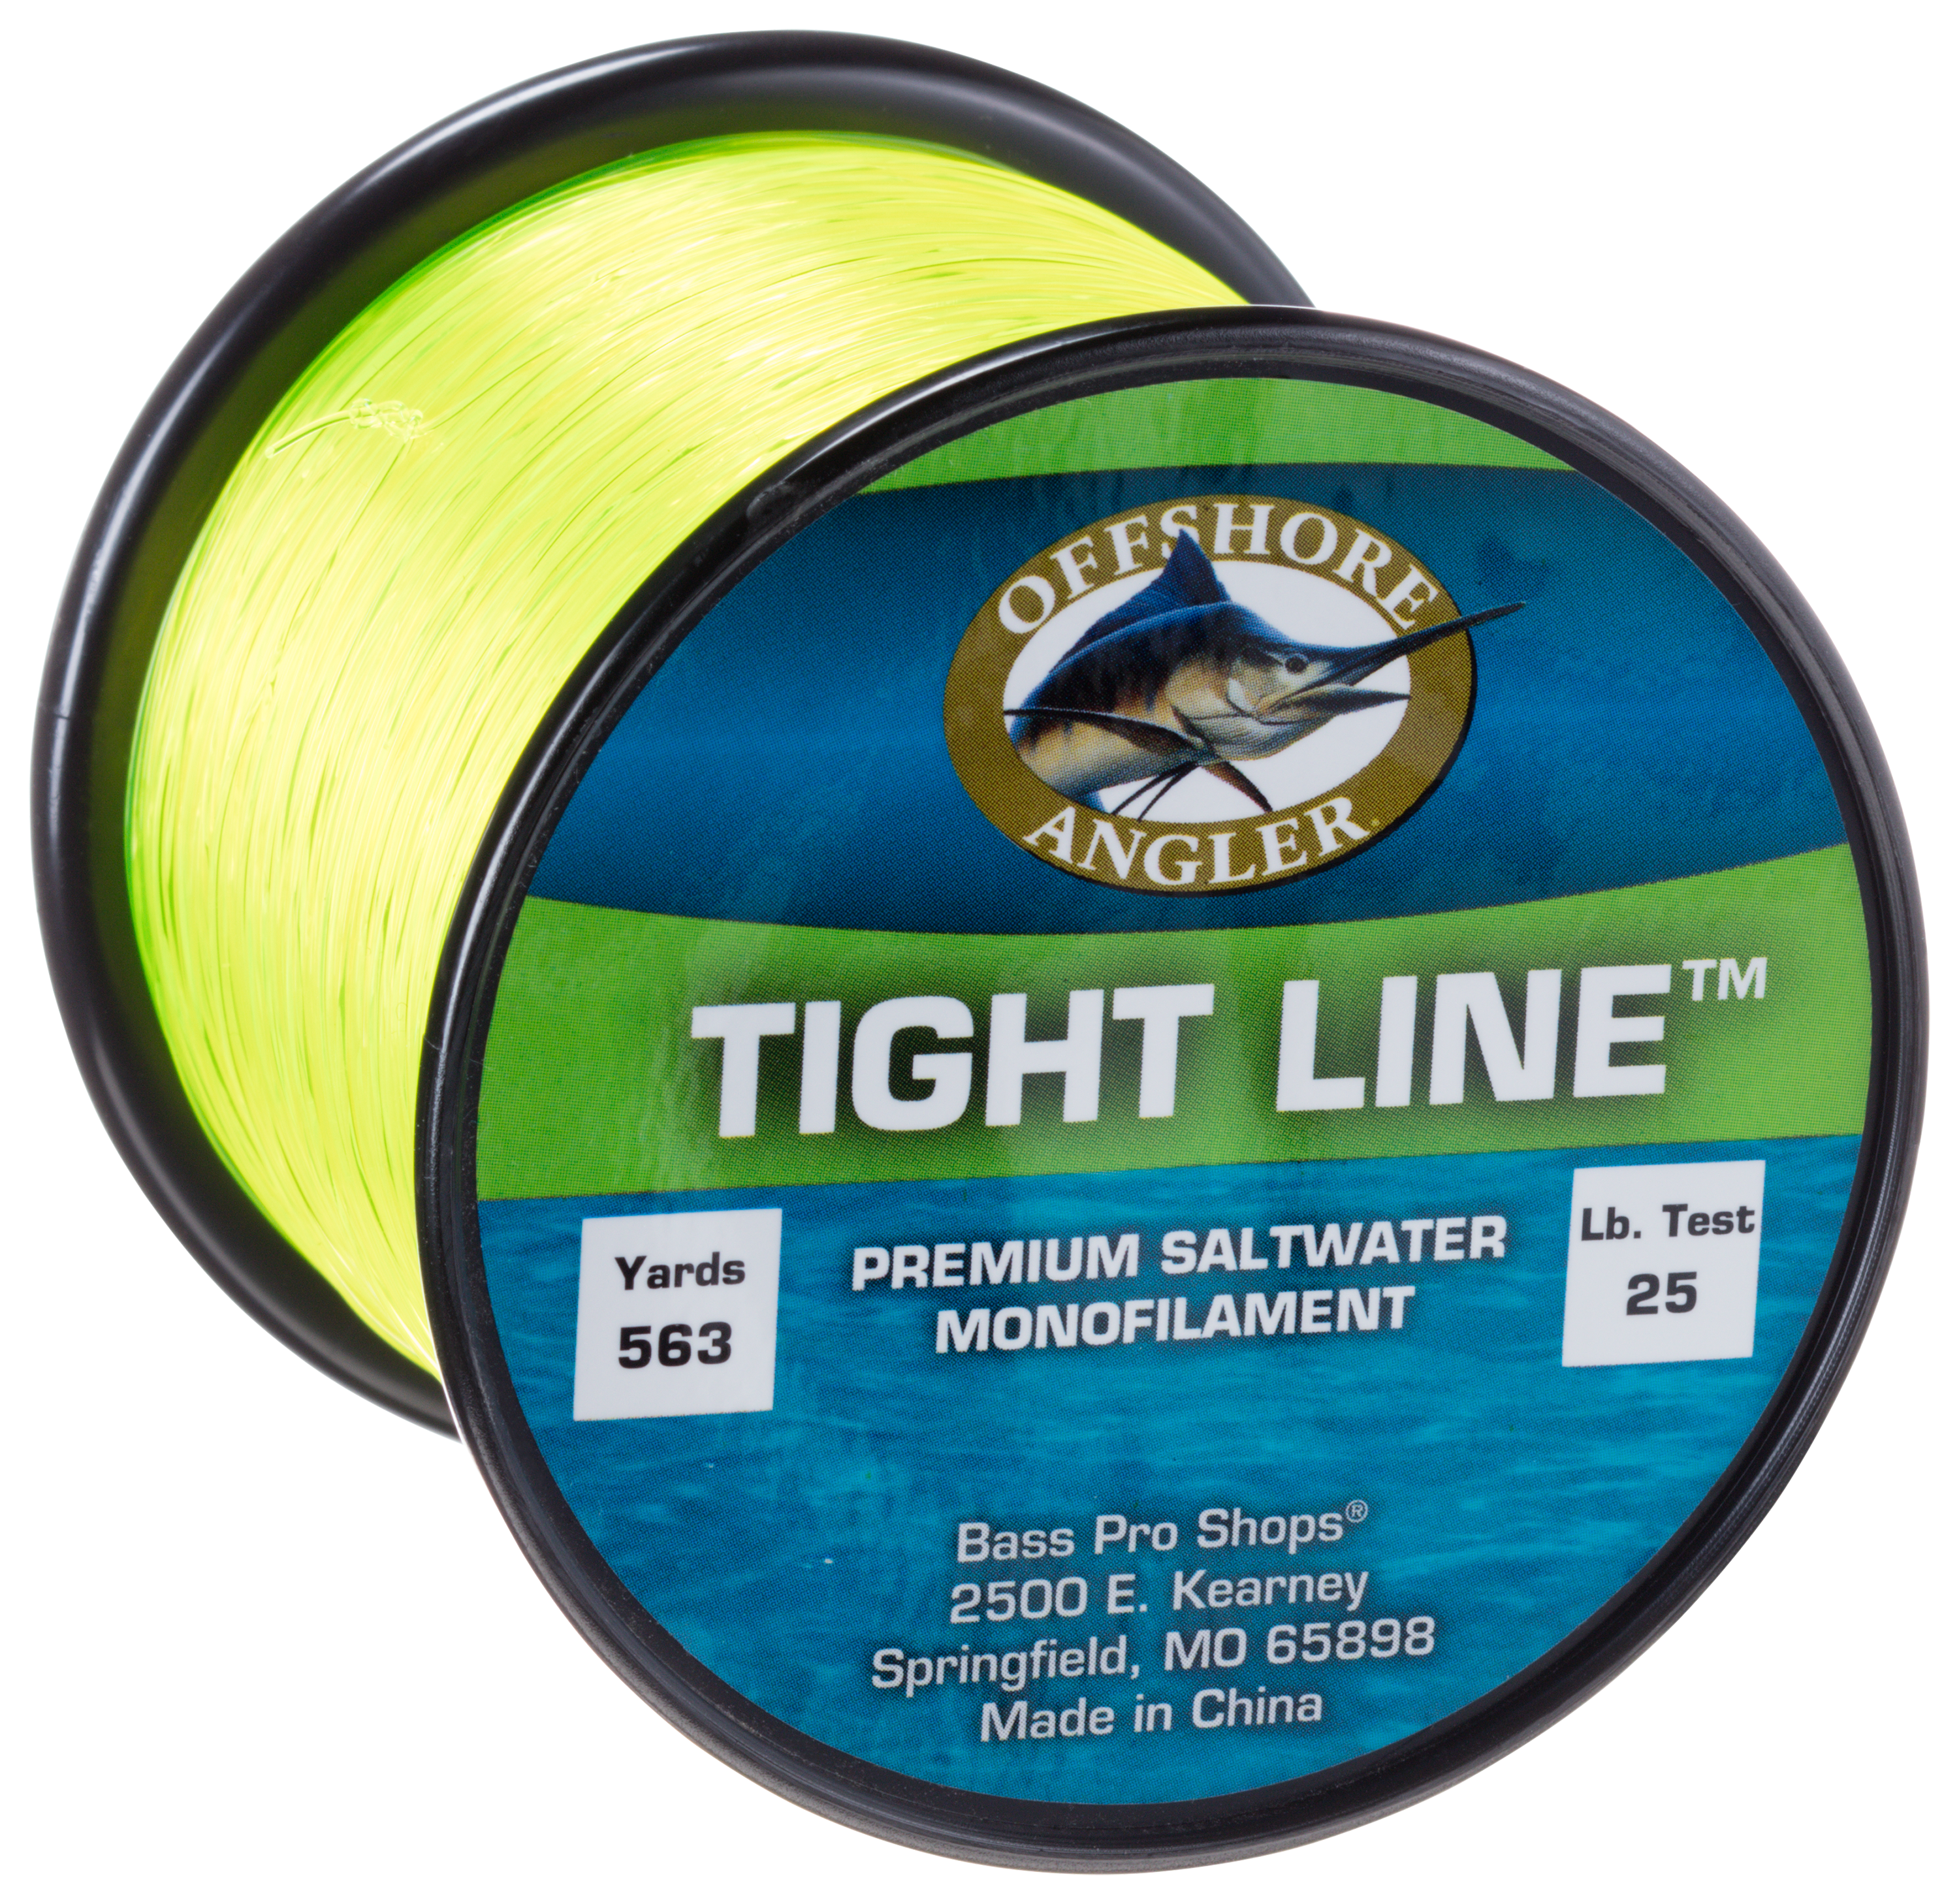 Ande Monofilament Line (Clear, 10 -Pounds Test, 1/4# Spool)